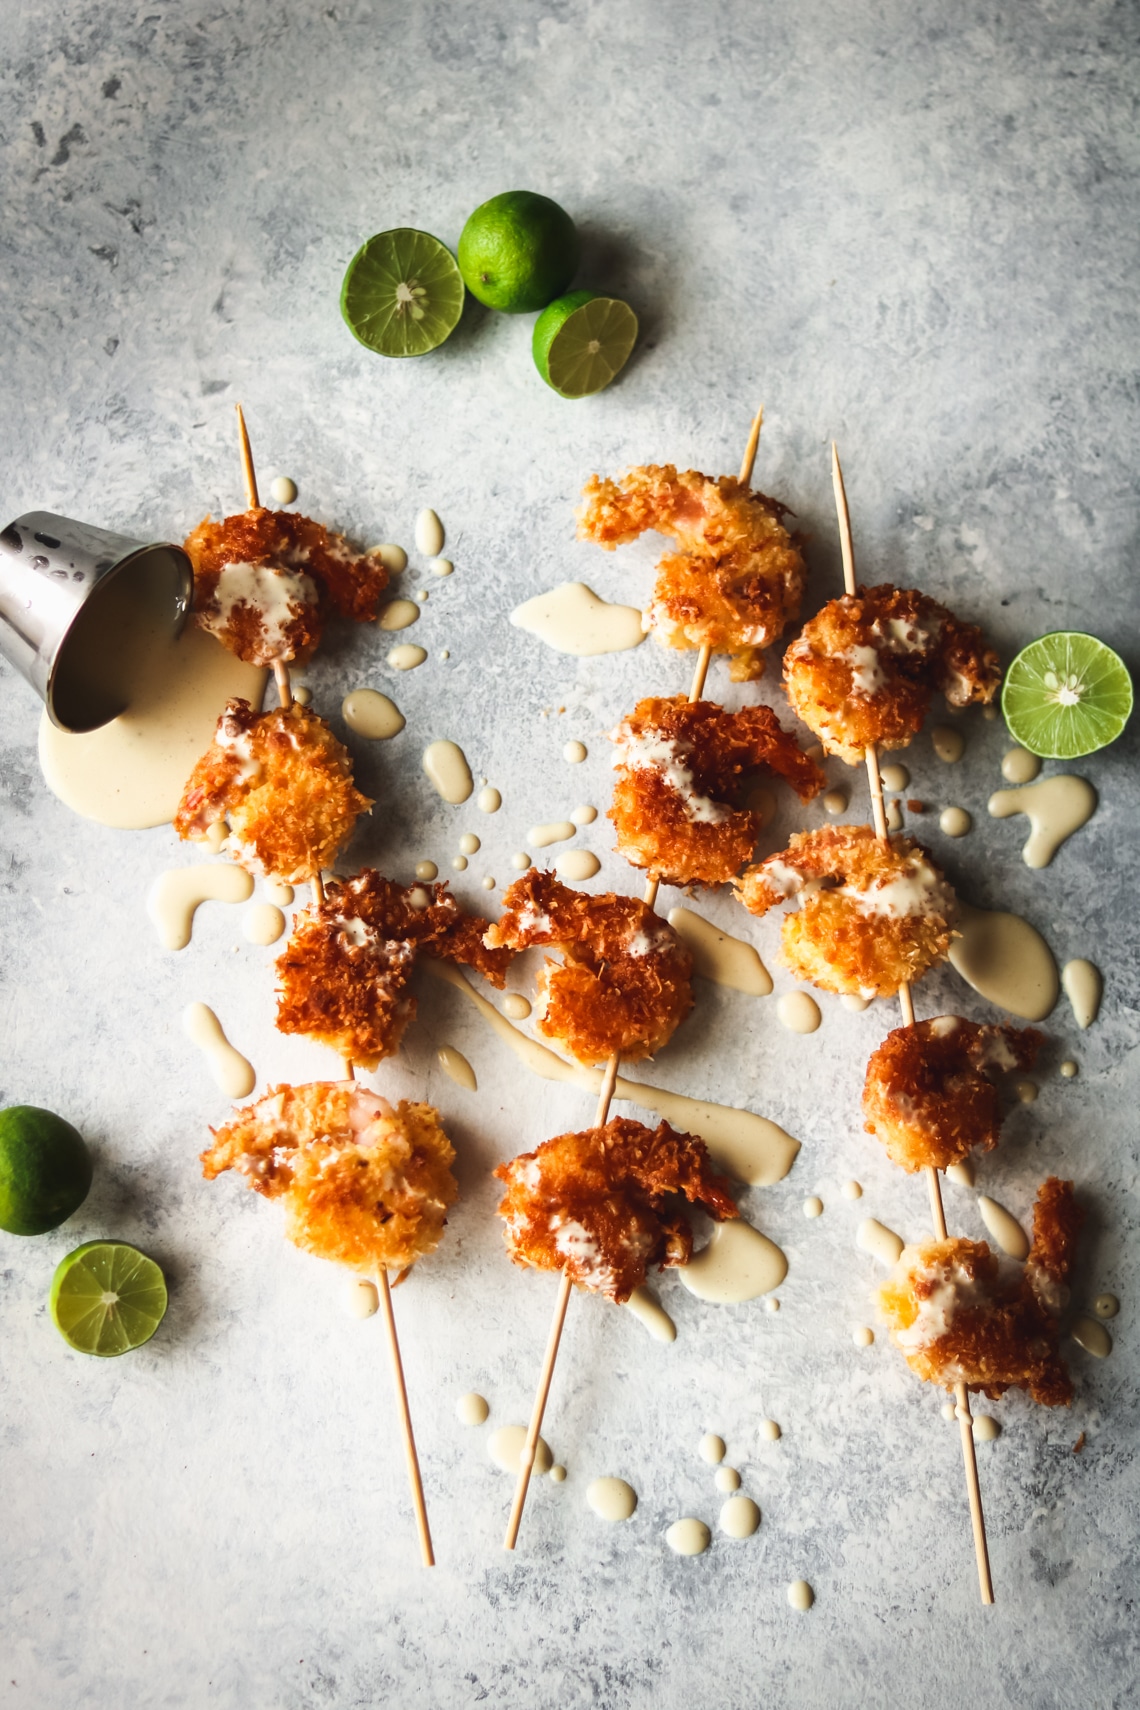 coconut shrimp on wooden skewers with key lime aioli drizzled all over. There are sliced key limes laying around the coconut shrimp on the table and a small sauce cup of the key lime aioli